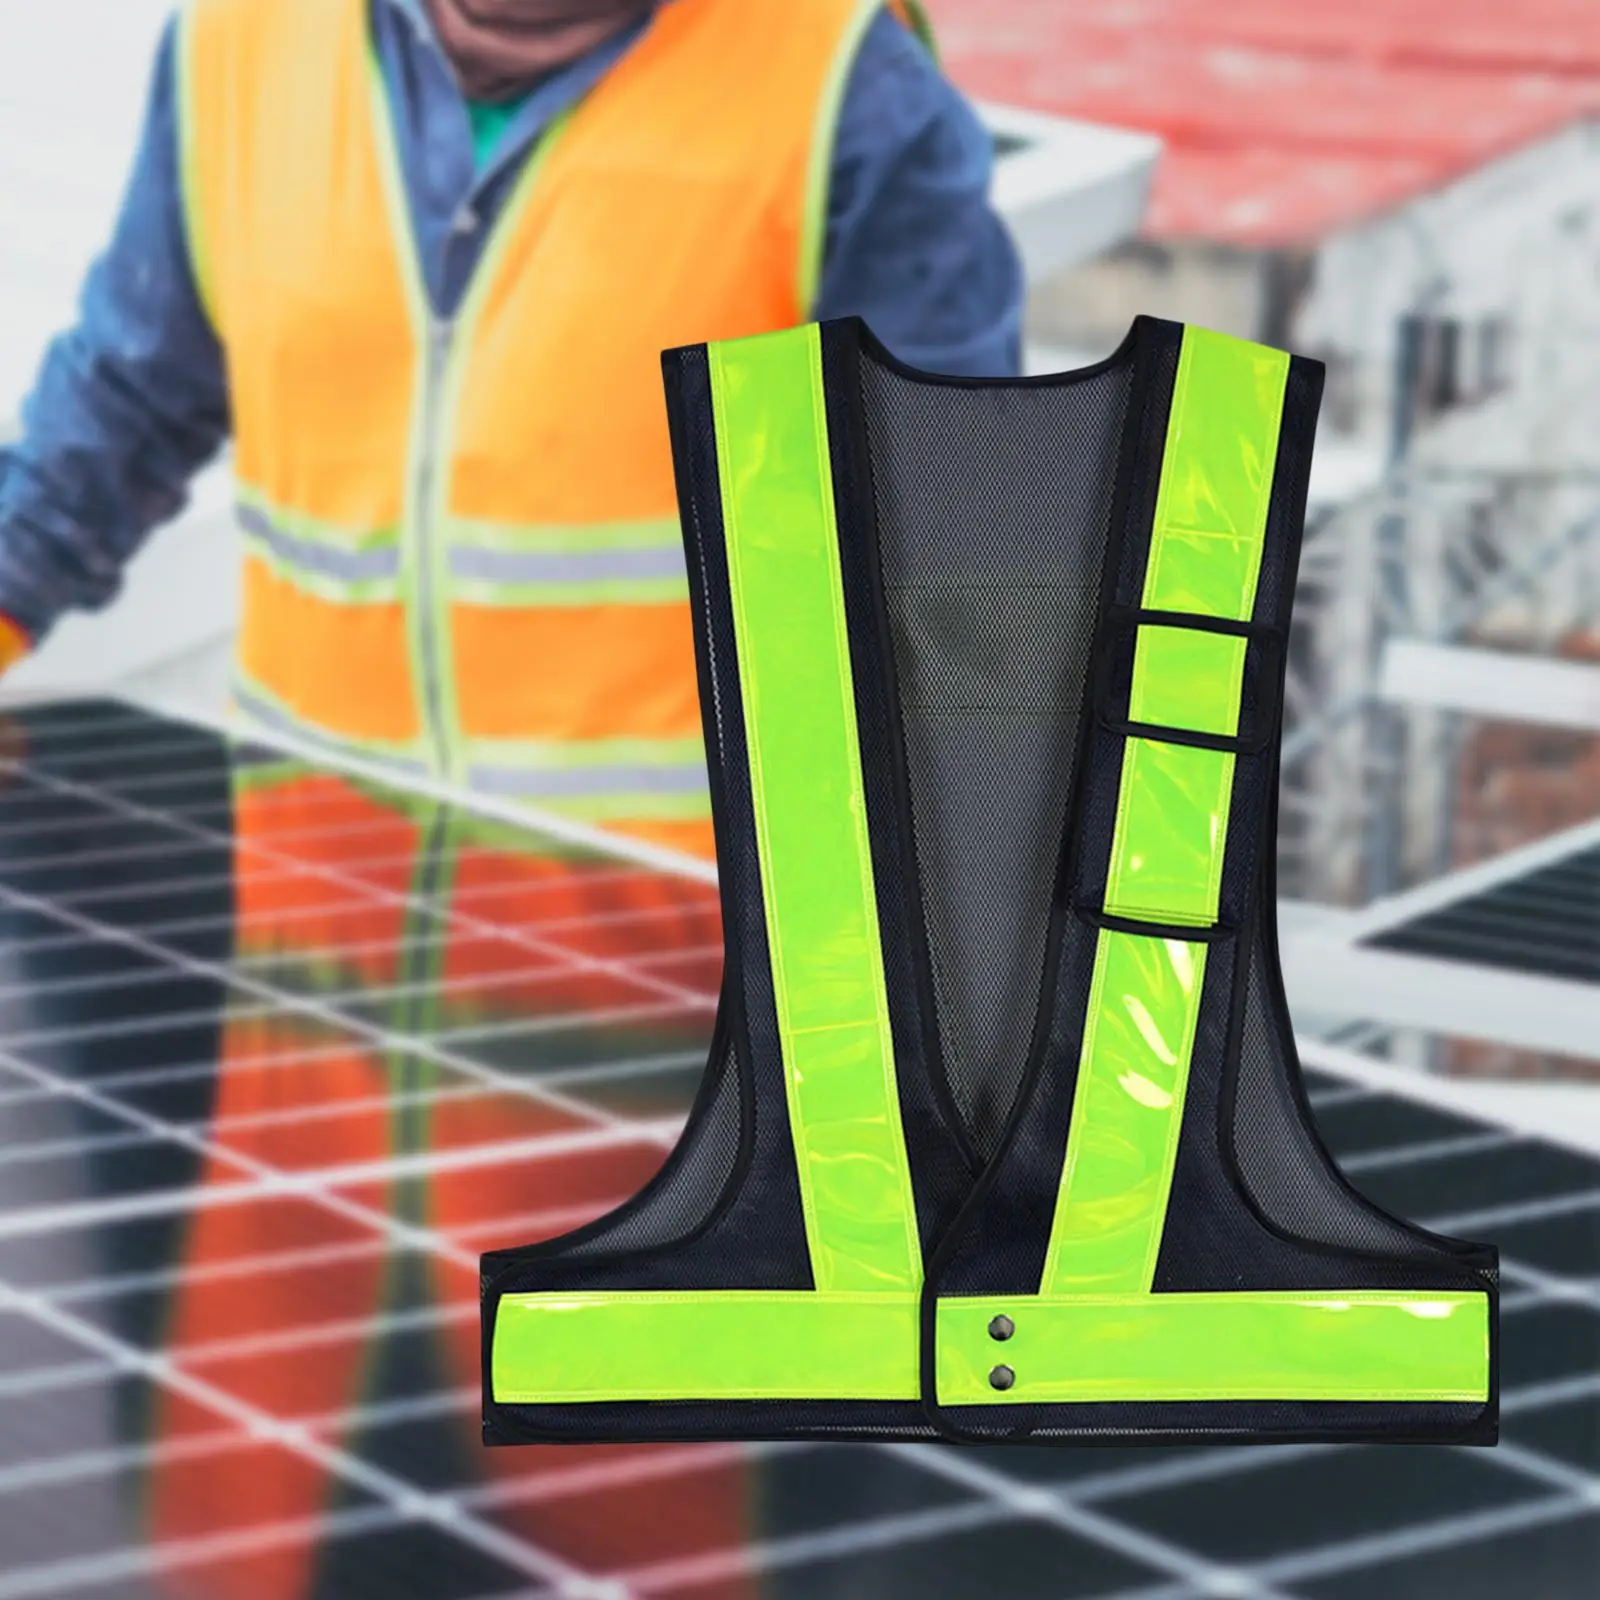 High Visible Reflective Safety Vest Breathable with Pocket Running Reflective Vest Gear for Walking Road Jogging Worker Cycling